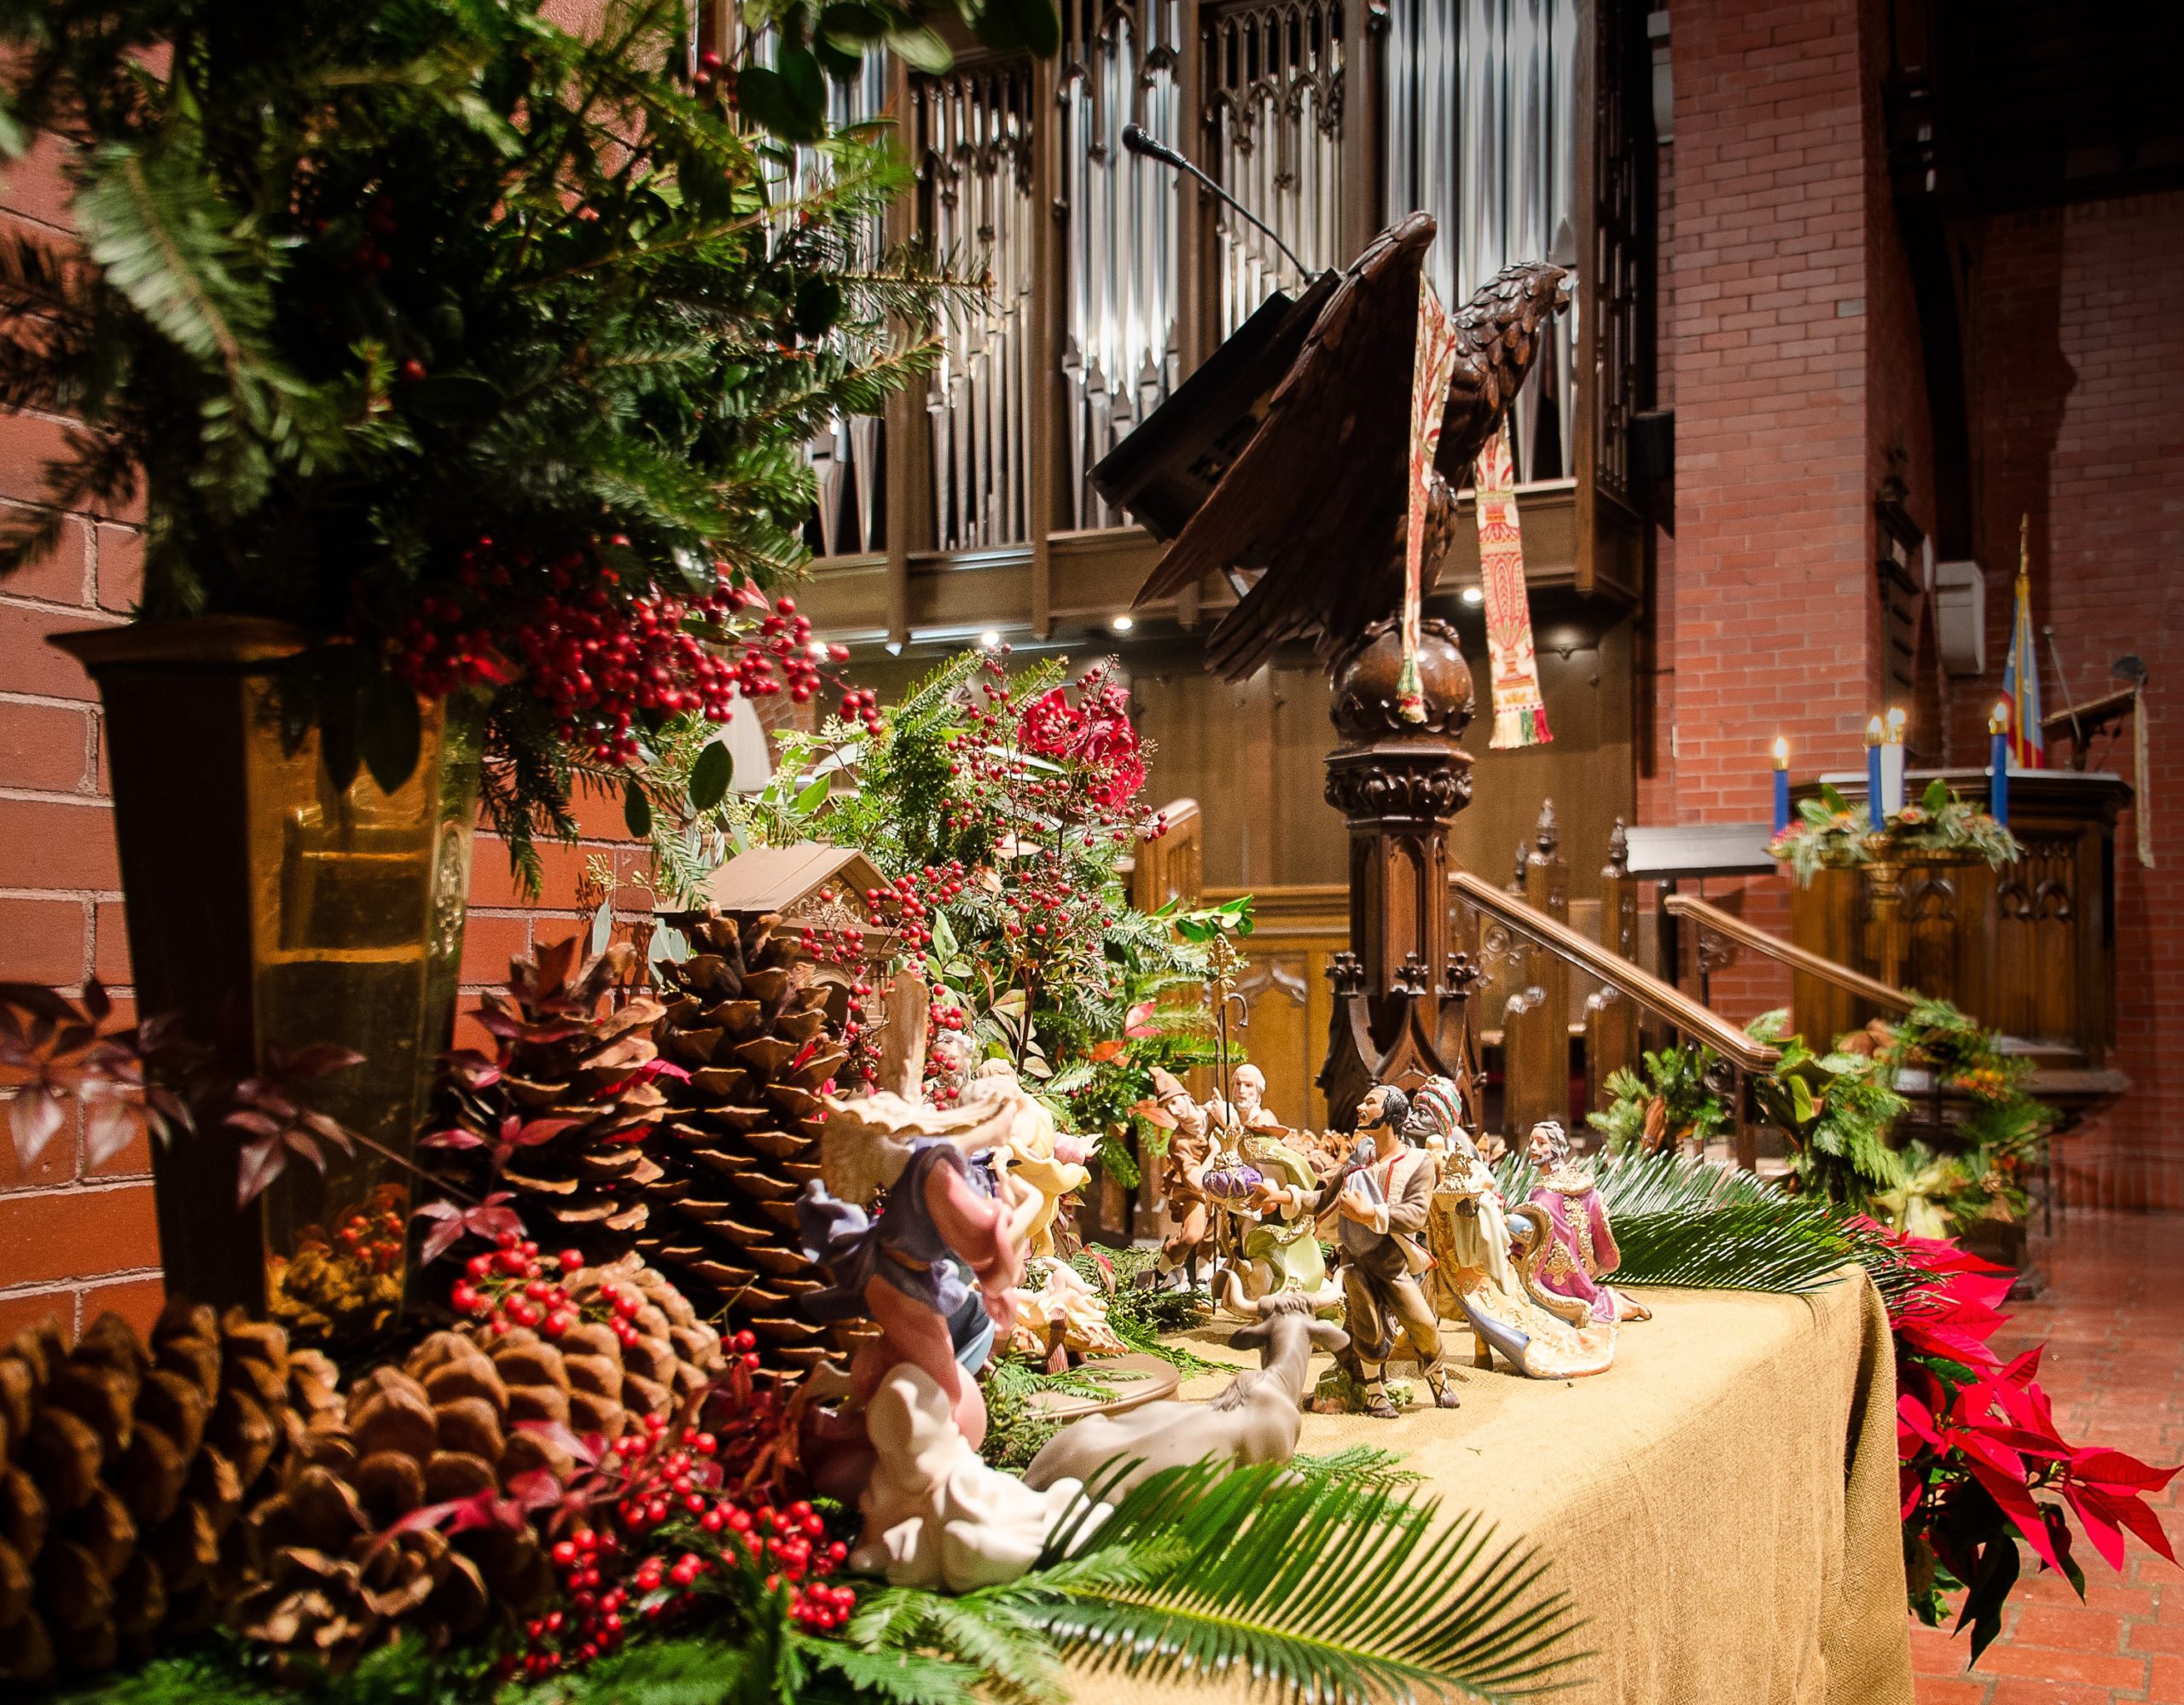 Decorated nativity scene with lectern, organ pipes, and advent wreath in background inside church